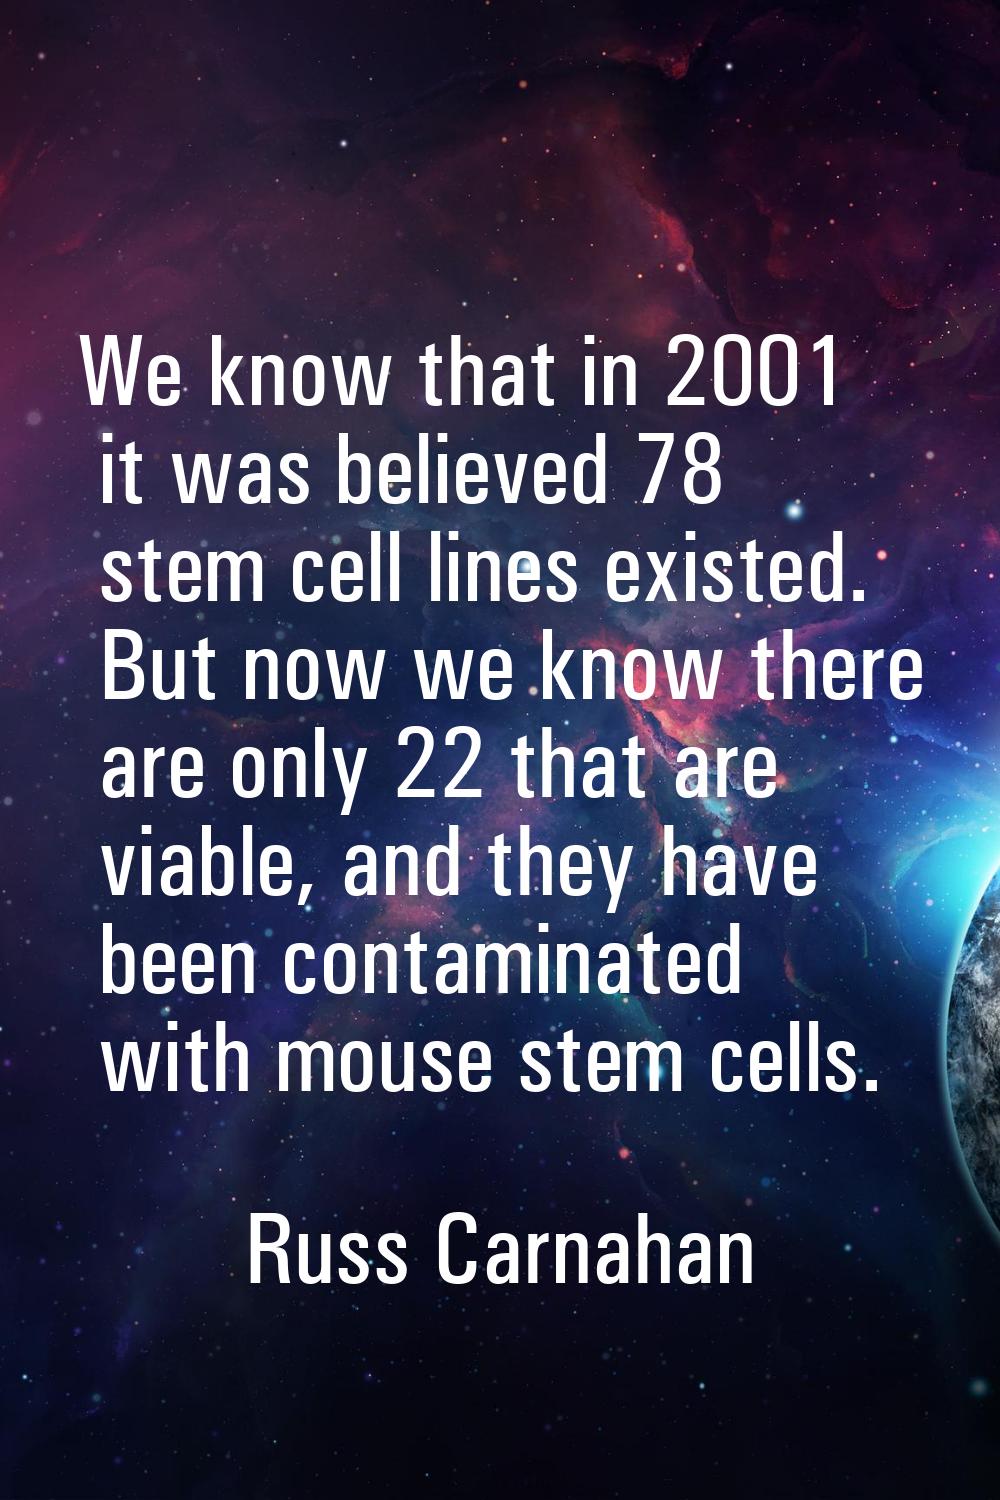 We know that in 2001 it was believed 78 stem cell lines existed. But now we know there are only 22 